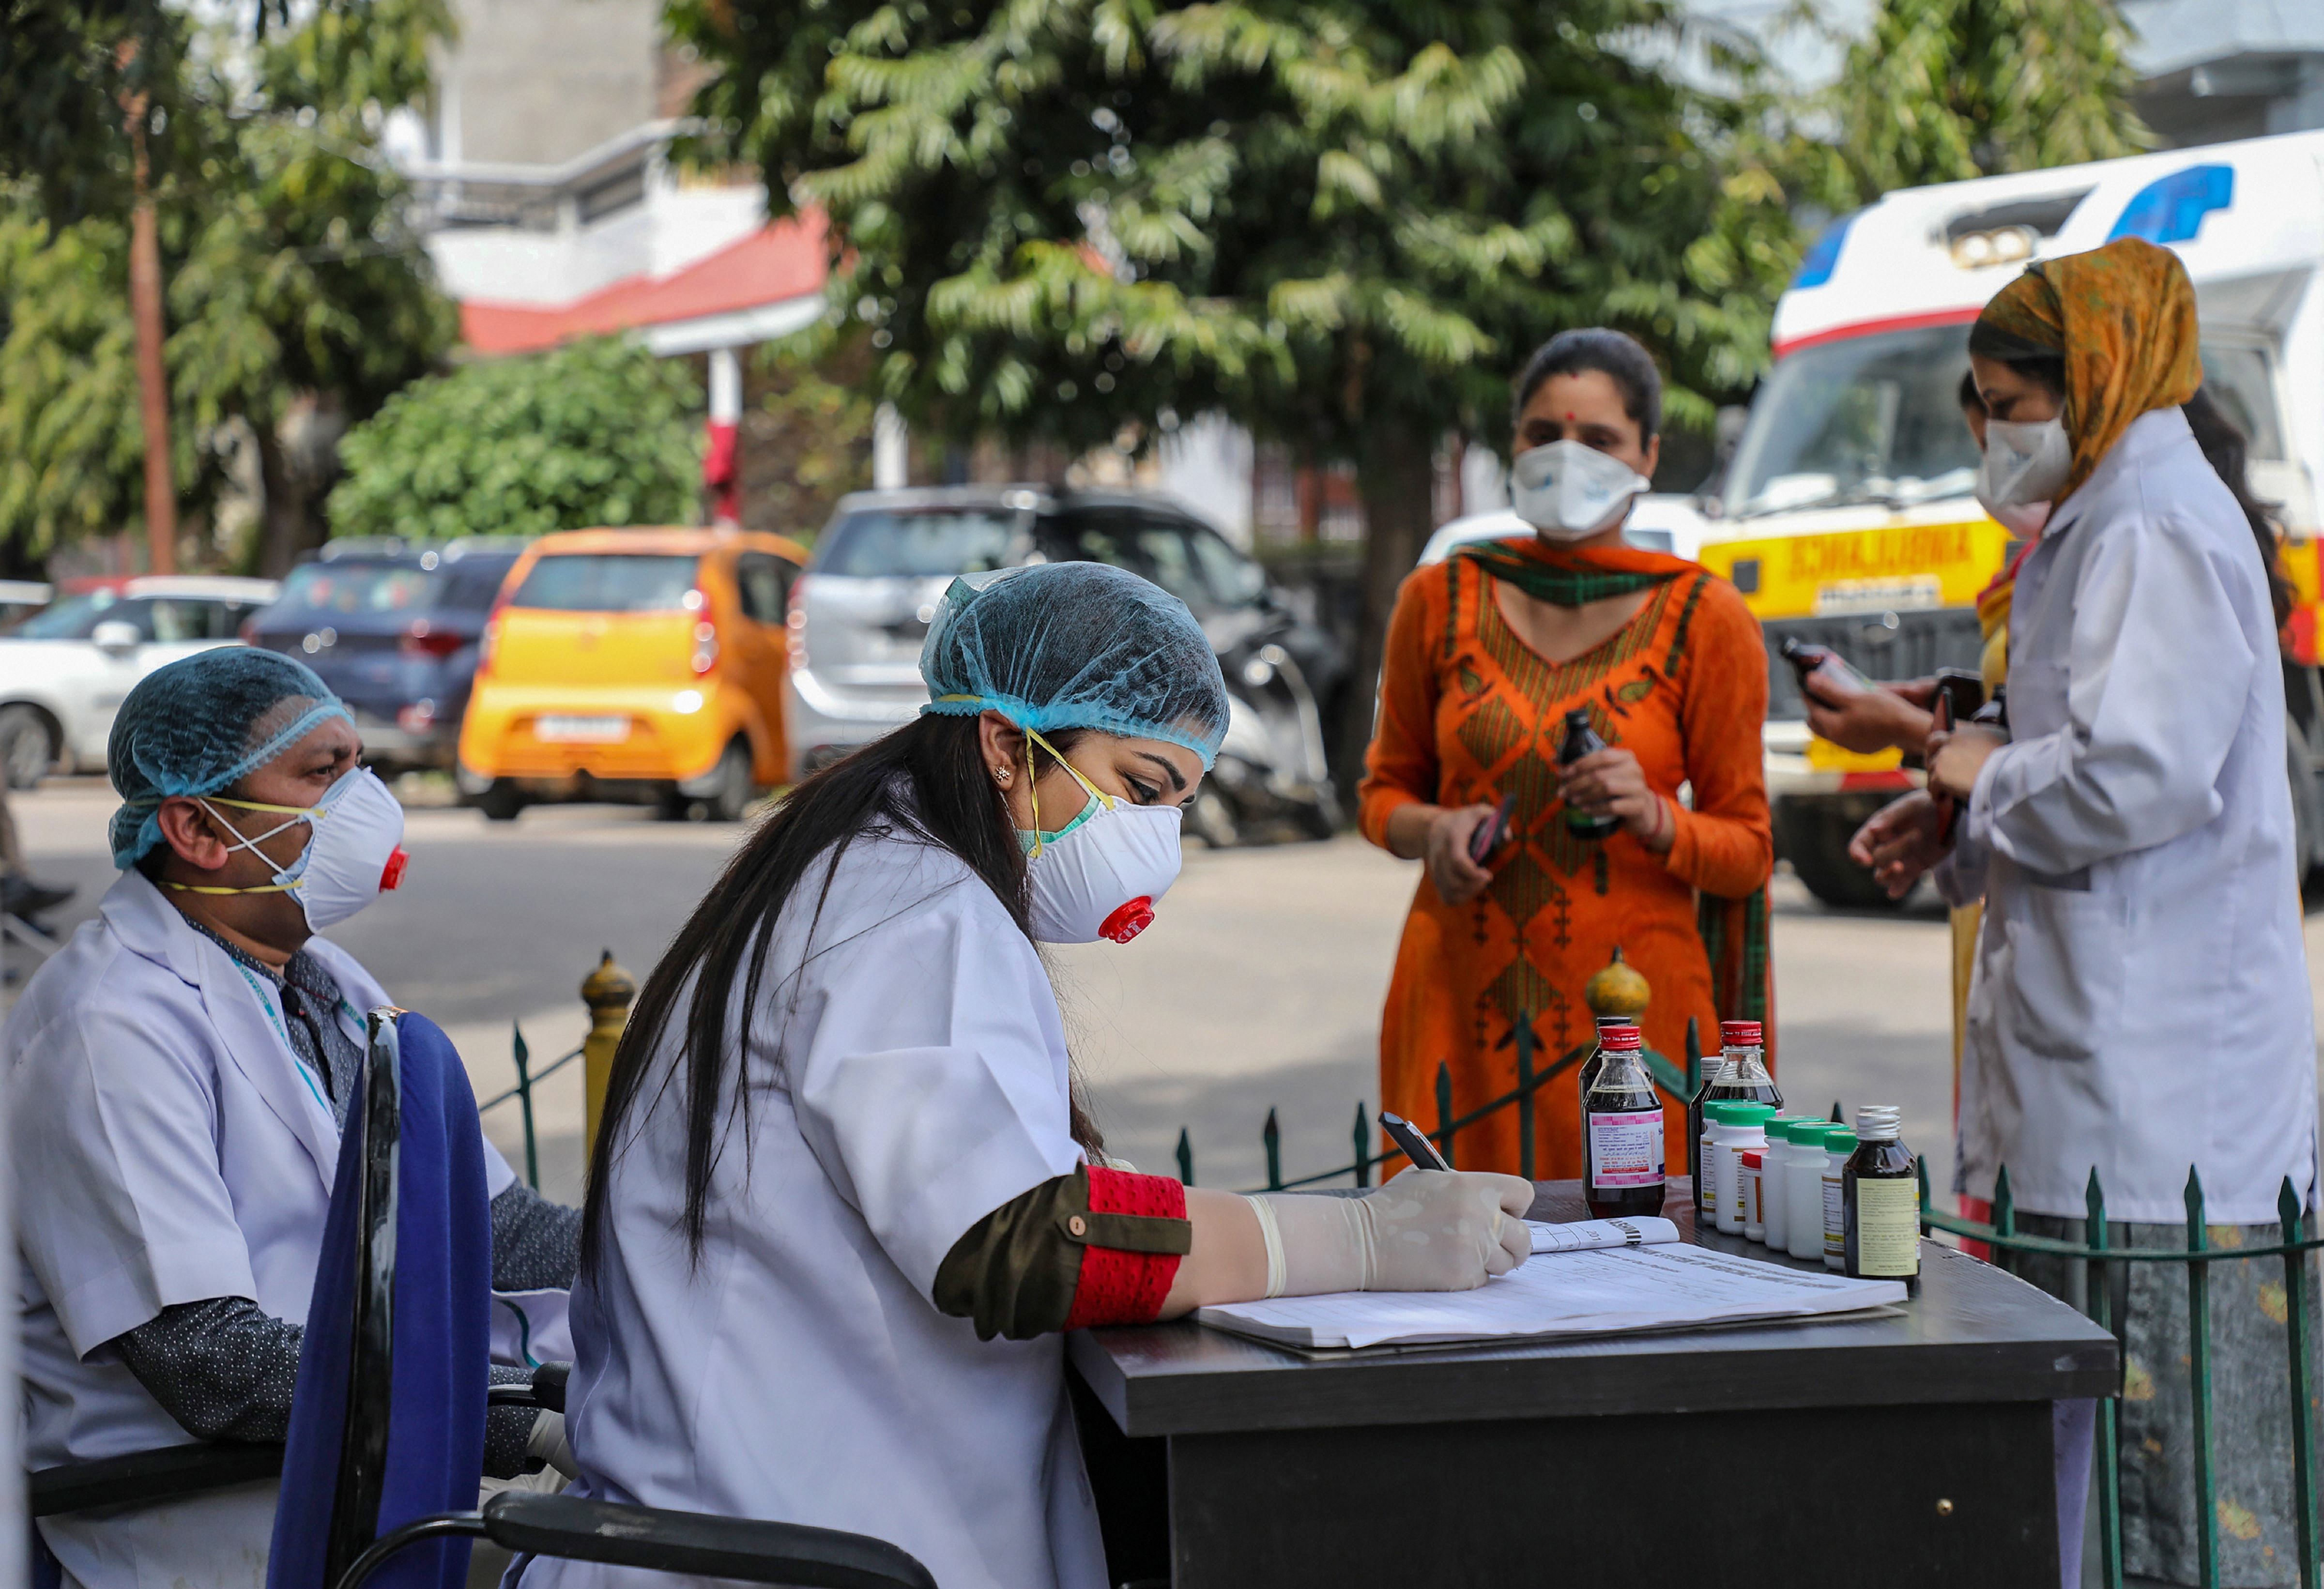 Doctors wearing protective suits as a precautionary measure against the coronavirus check patients outside an isolation ward at Govt. Medical College hospital in Jammu. (PTI Photo)